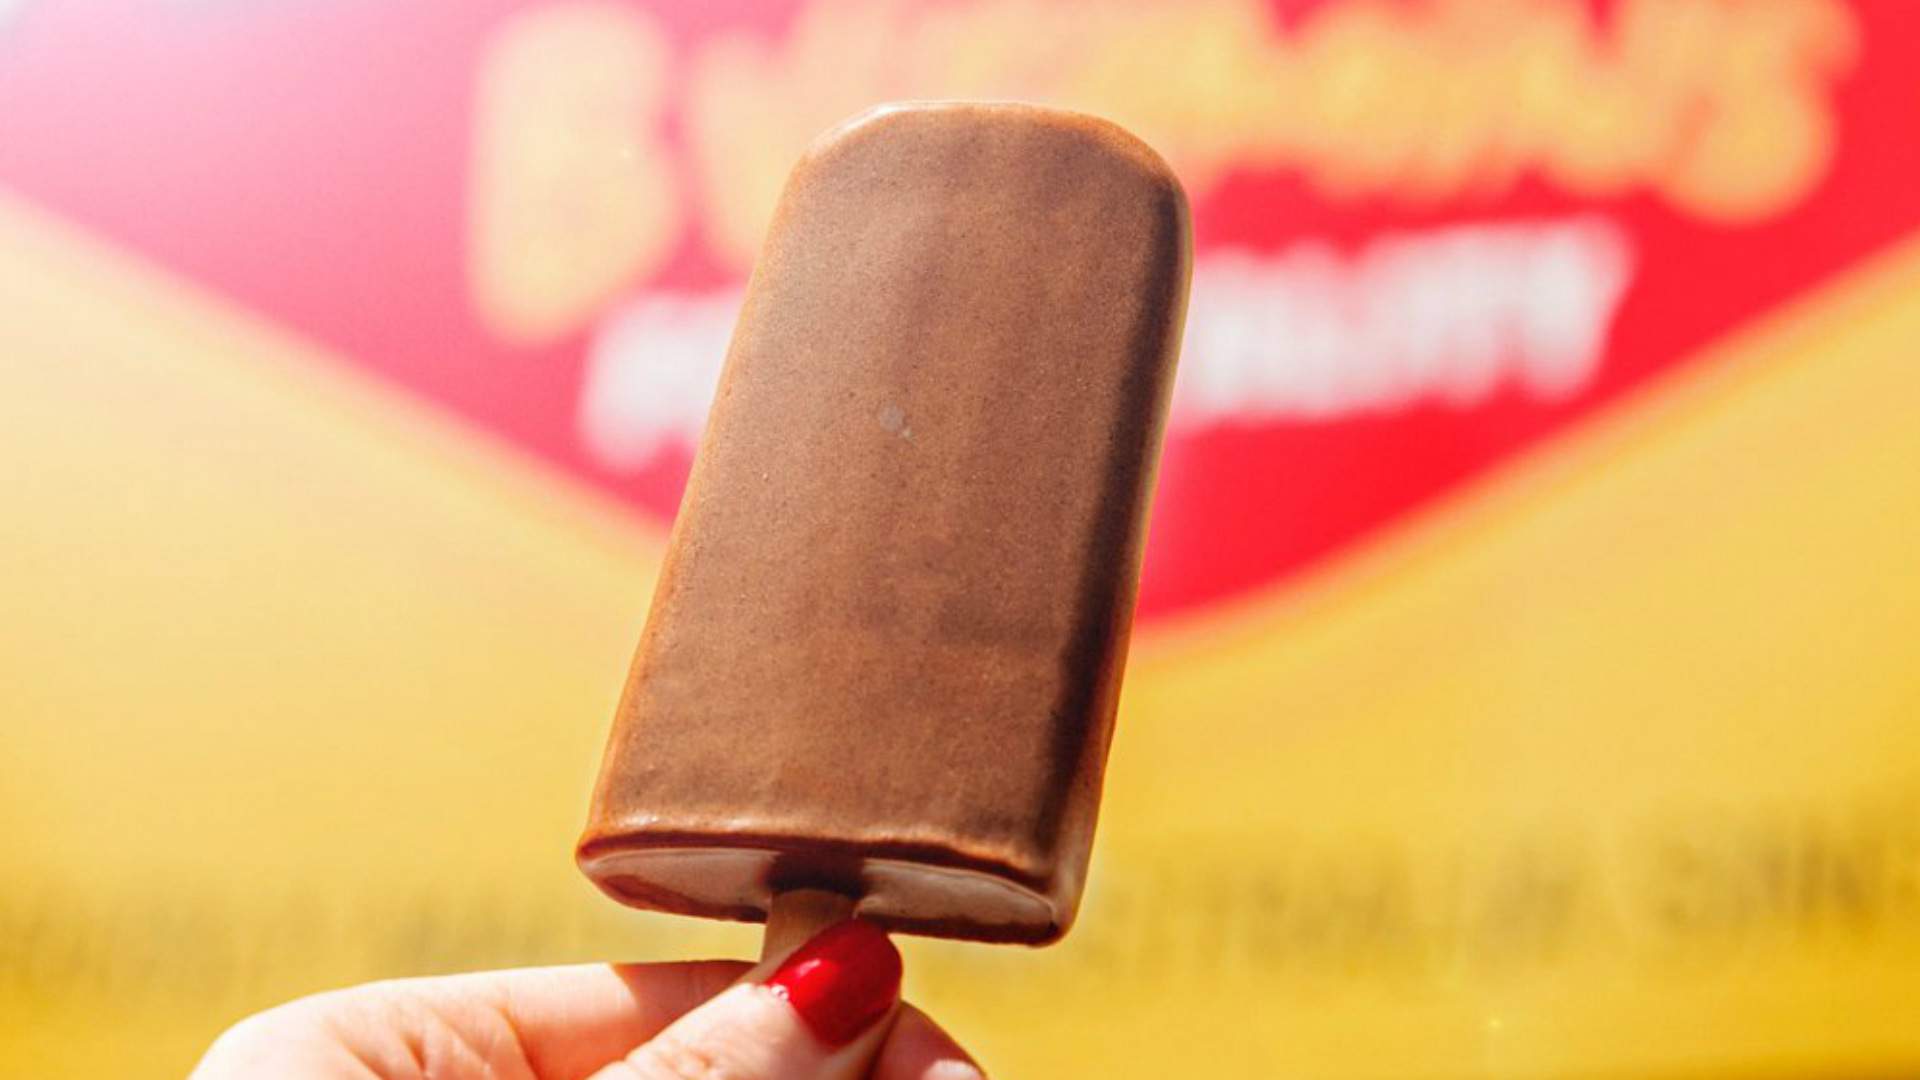 Vegemite Has Released an Icy Pole Recipe and People Are Confused